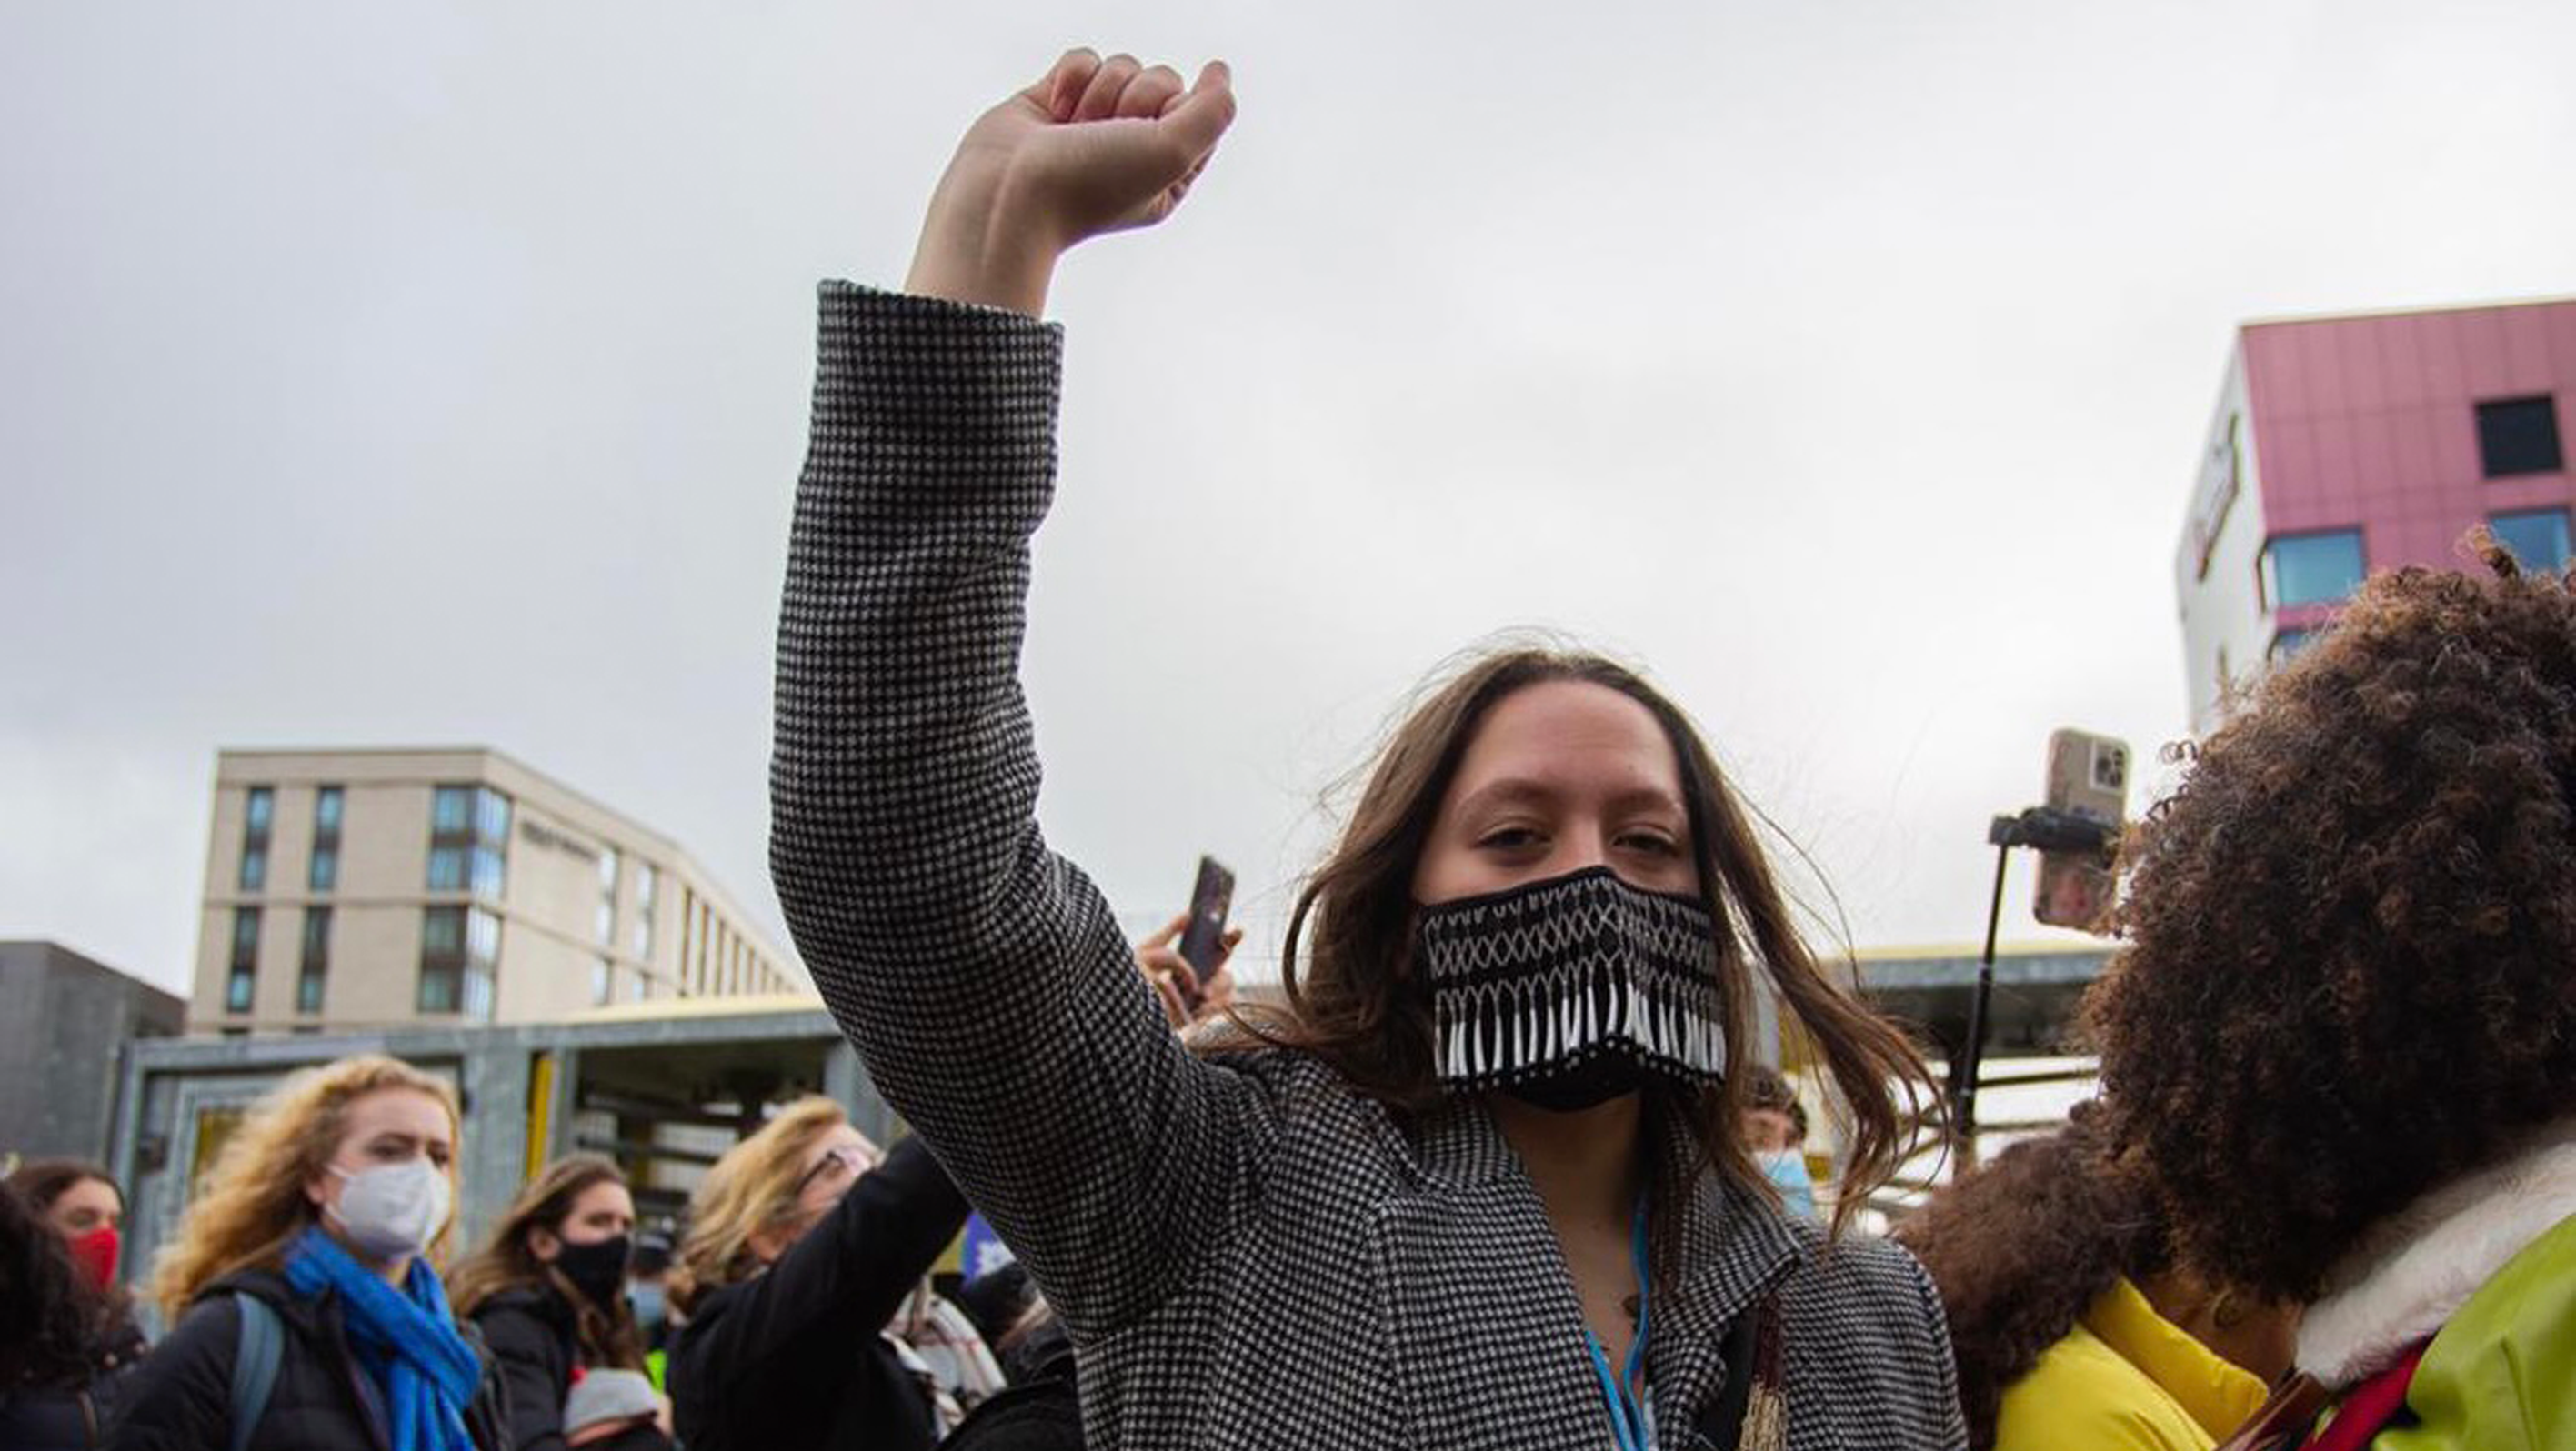 At COP26, Te Maia Wiki raises her fist among a group of activists.